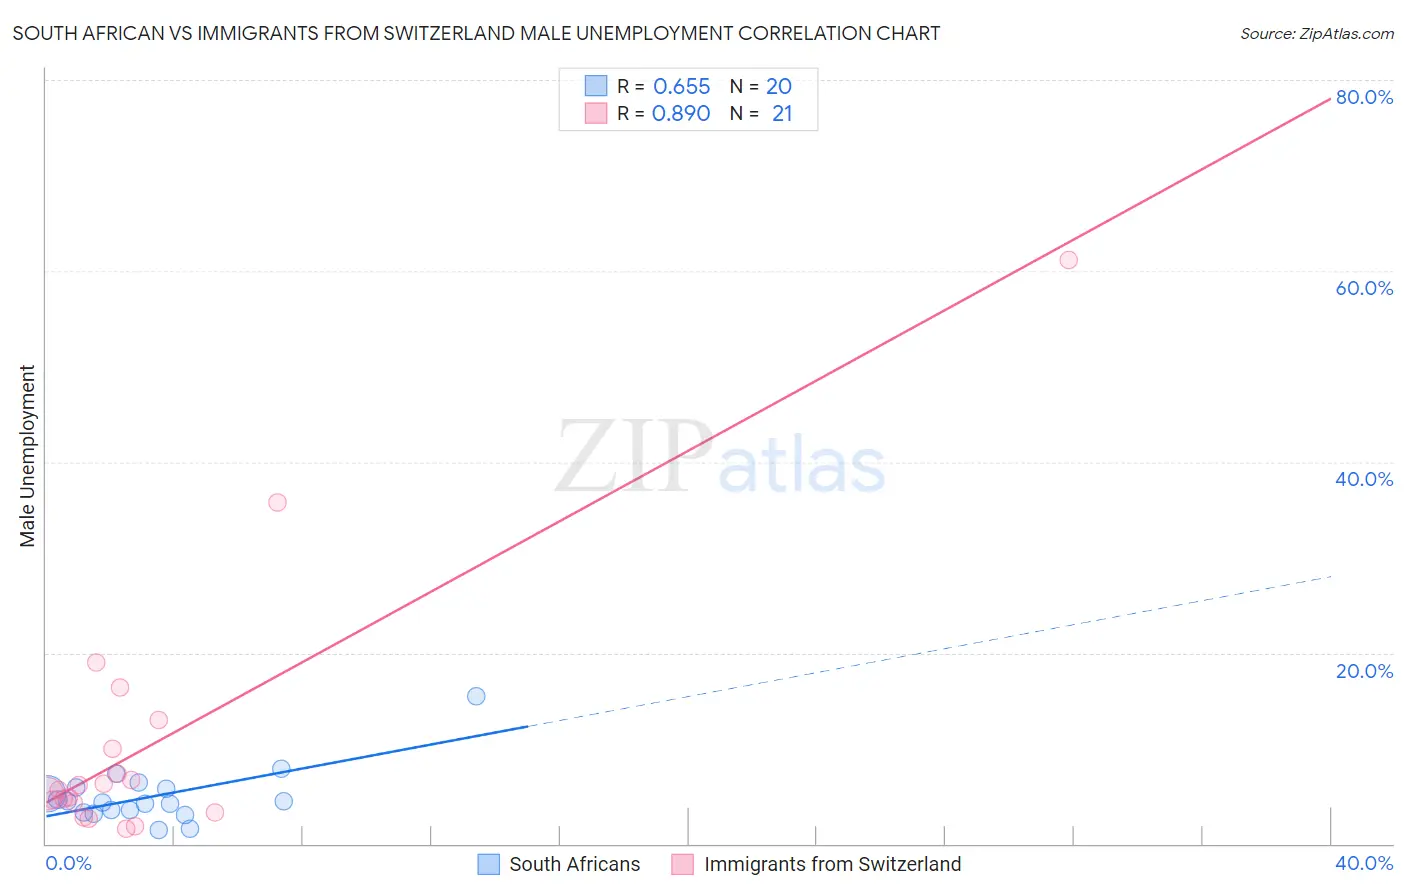 South African vs Immigrants from Switzerland Male Unemployment